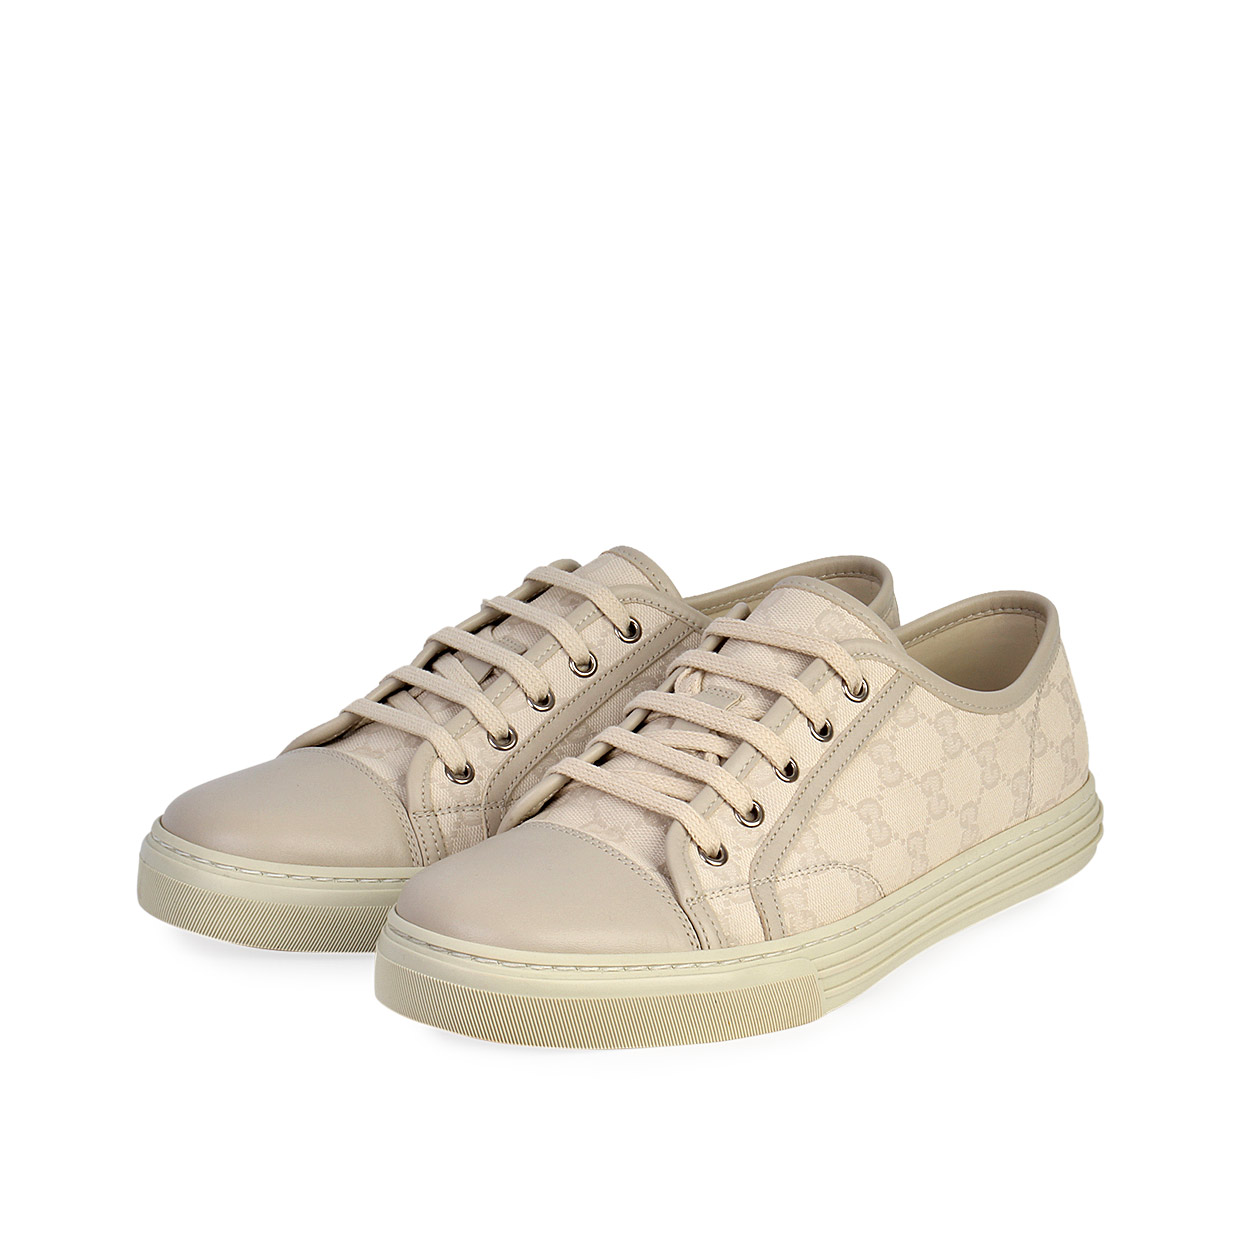 GUCCI Leather Toe GG Canvas Low Top 